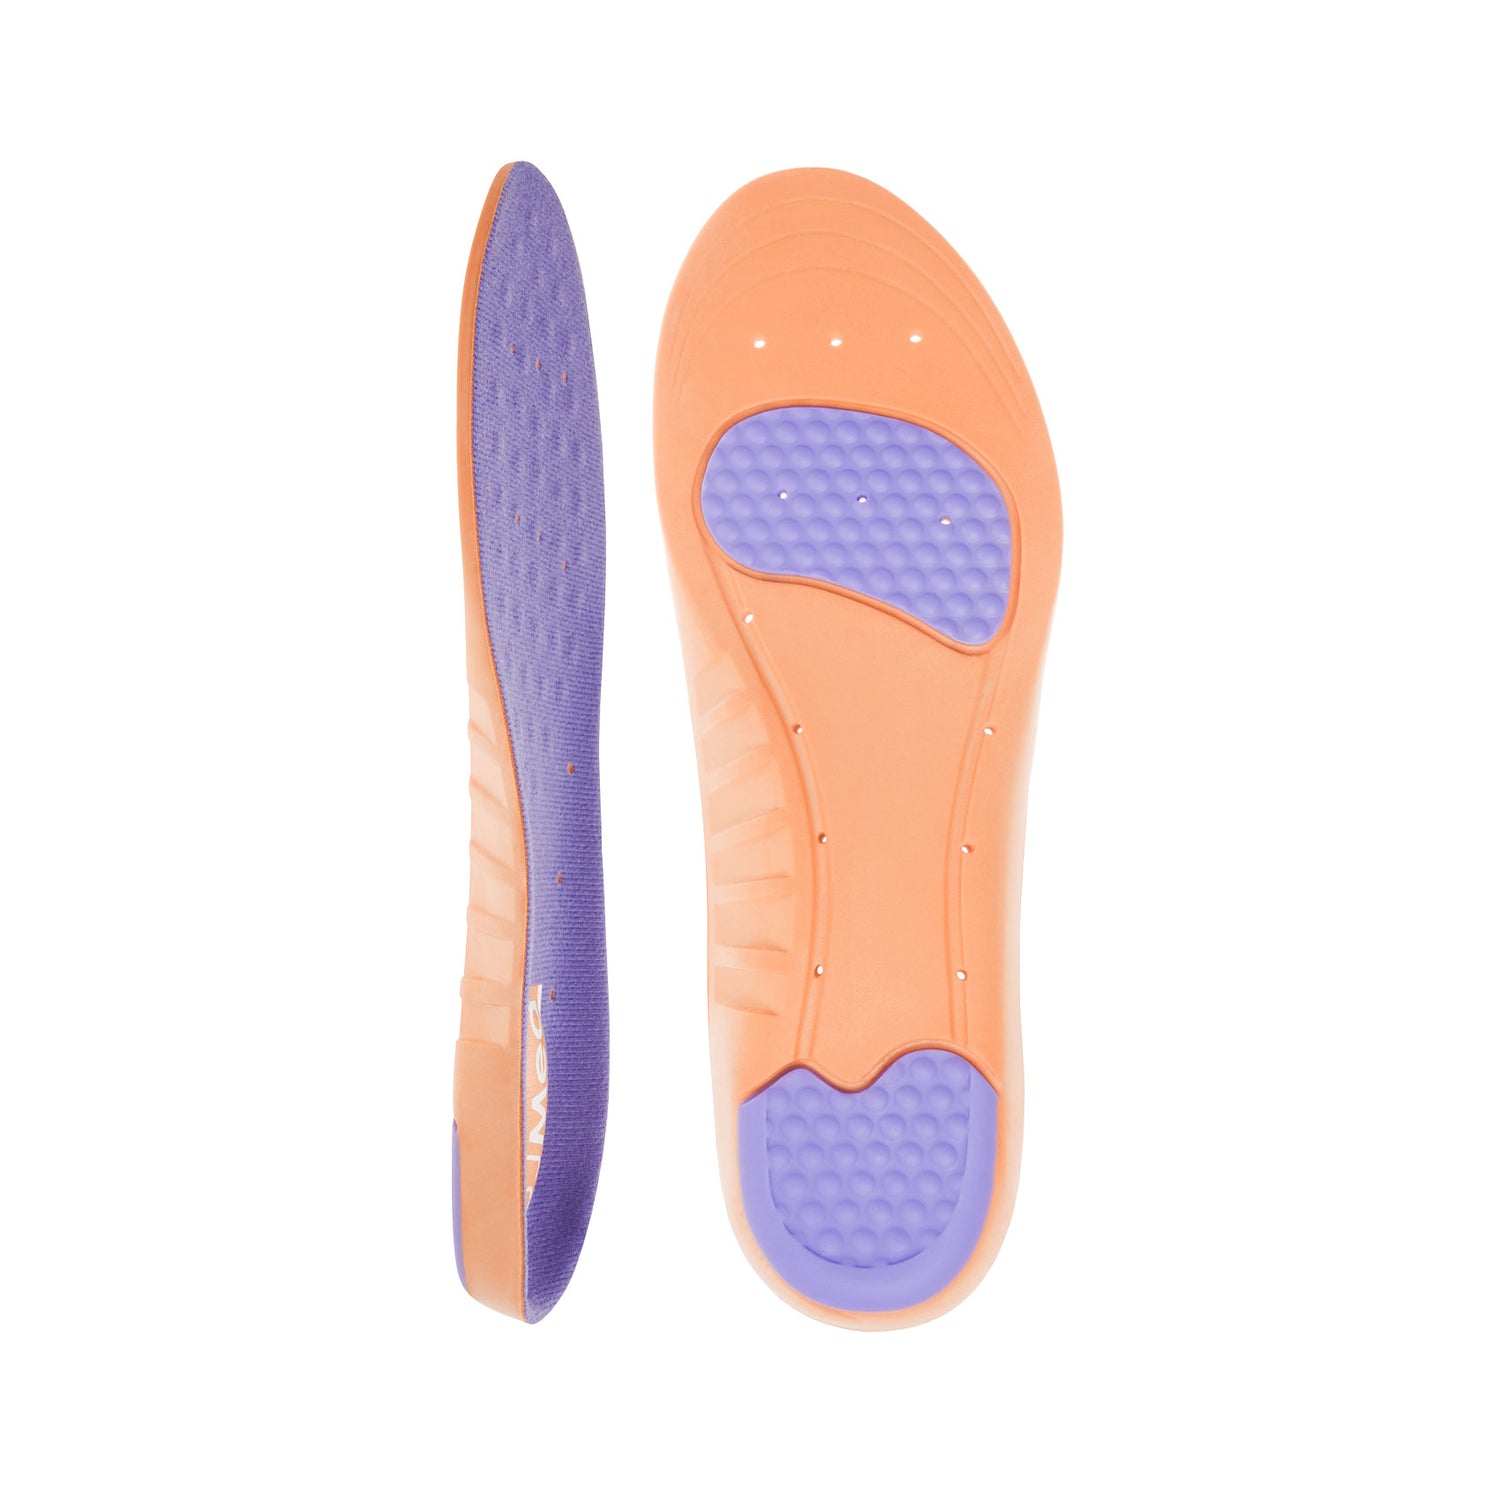 DJMed Stamina - Anti-Fatigue Soft Cushion Insoles - Womens 4-6.5